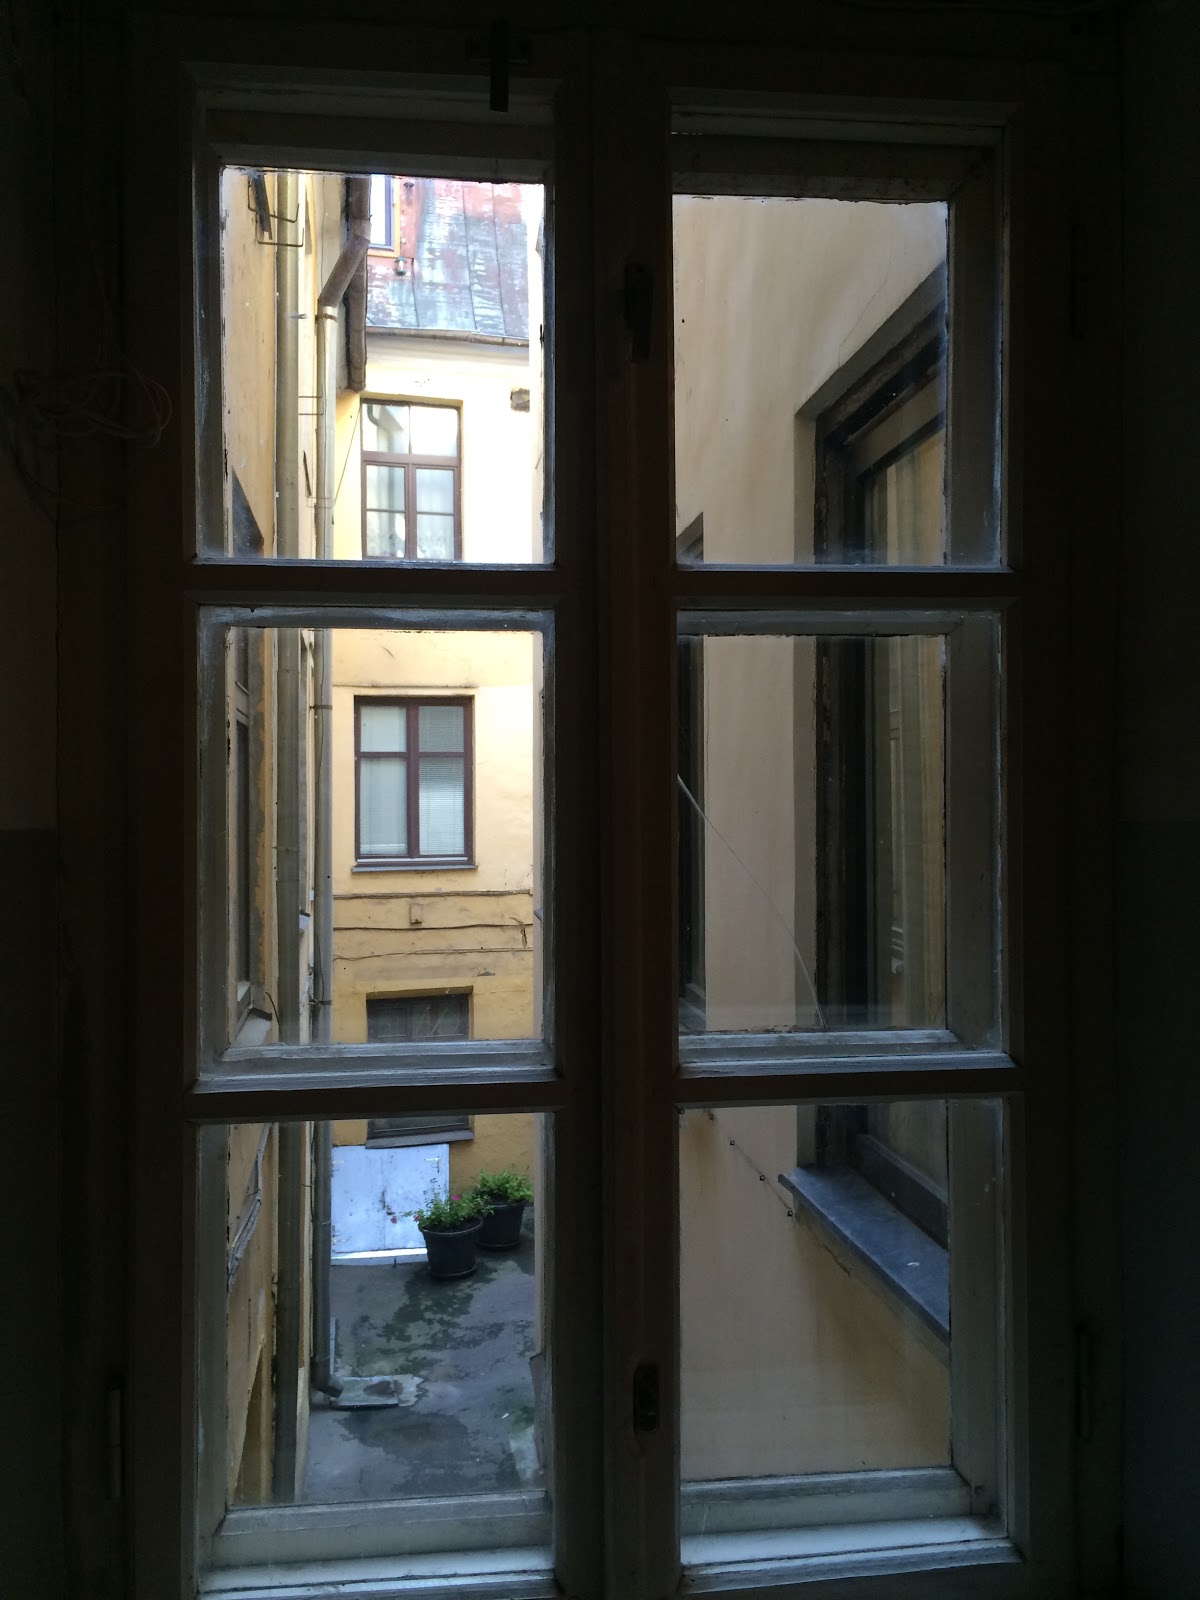 View into courtyard from our studio apartment